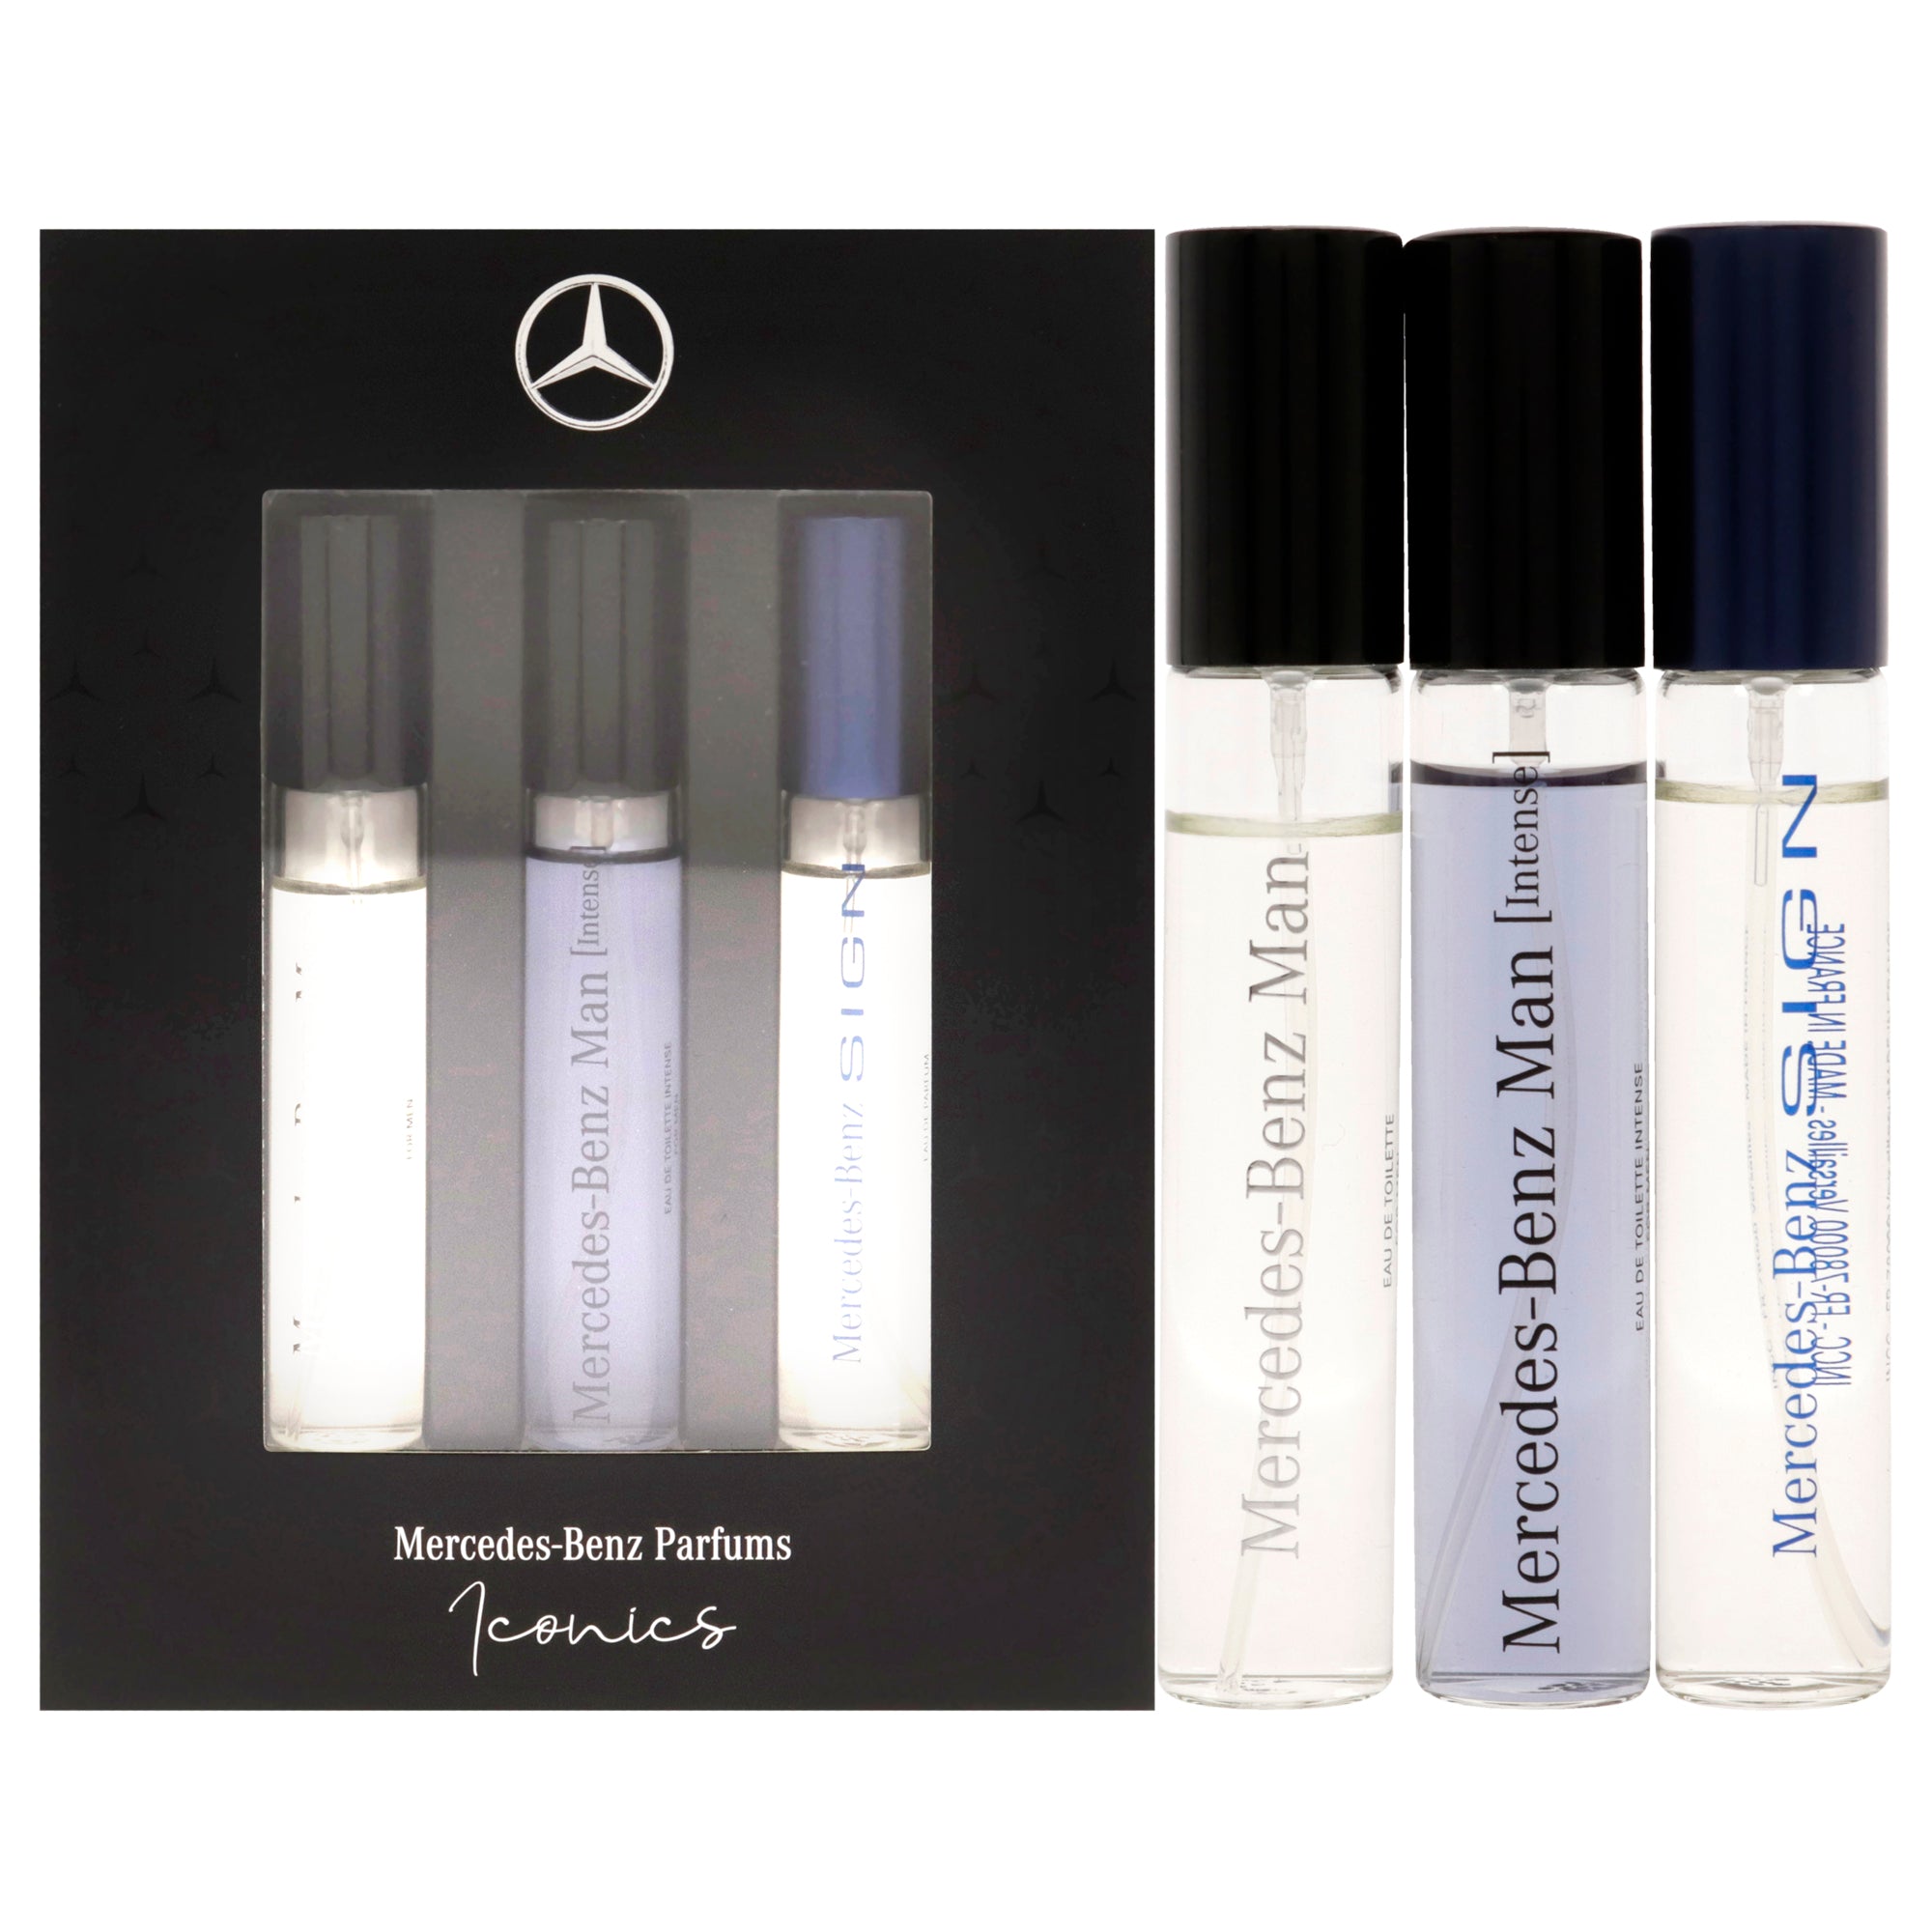 Mercedes-Benz Discovery Coffret by Mercedes-Benz for Unisex - 3 Pc Mini Gift Set 0.34oz Mercedes-Benz Man EDT Spray, 0.34oz Mercedes-Benz Man Intense, 0.34oz Mercedes-Benz Sign